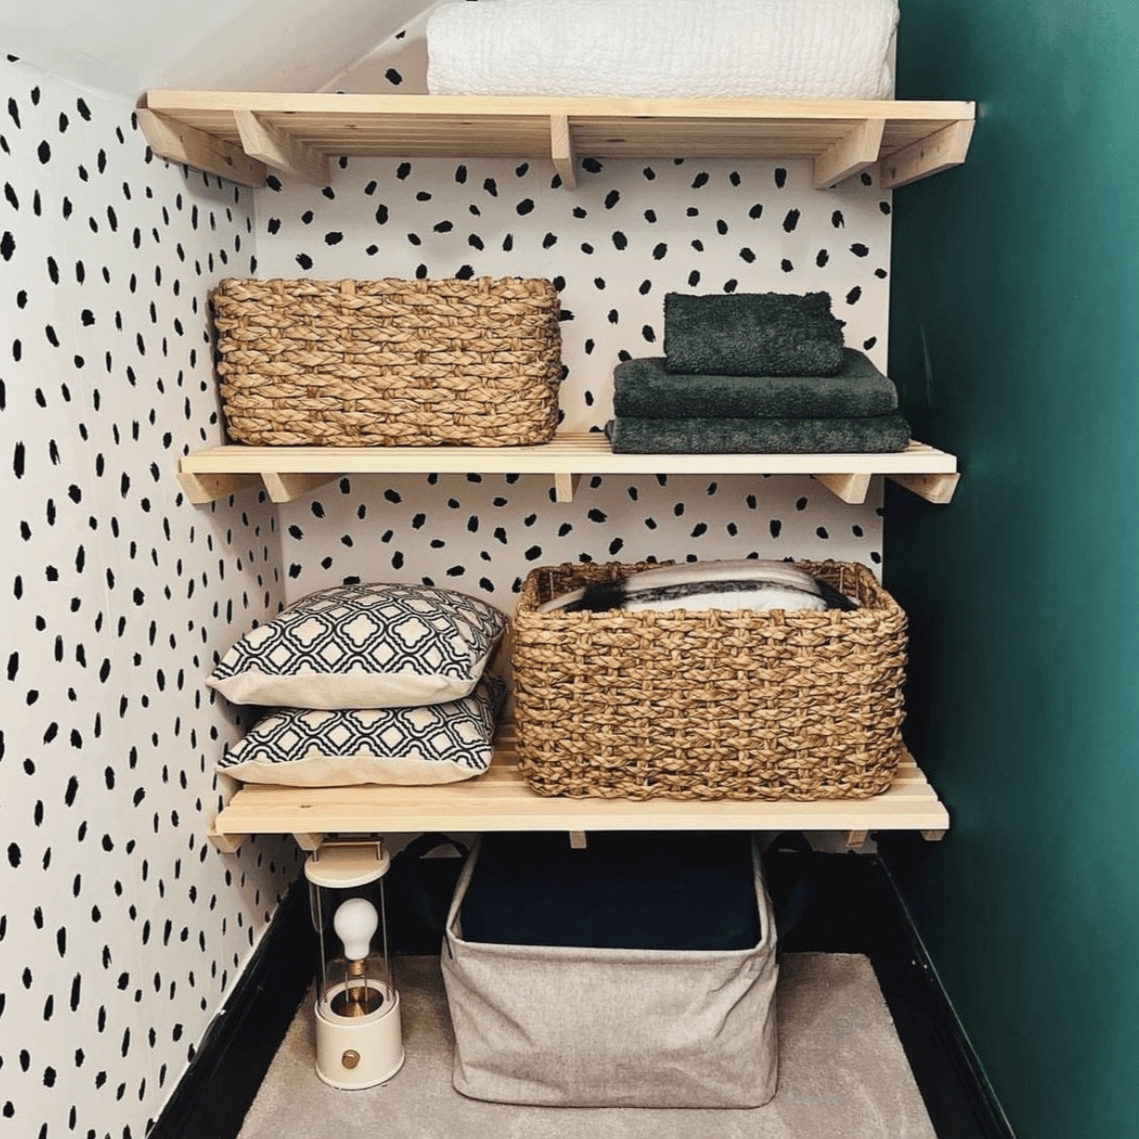 Airing Cupboard Wooden Slatted Shelves - 134.5 cm by 59 cm